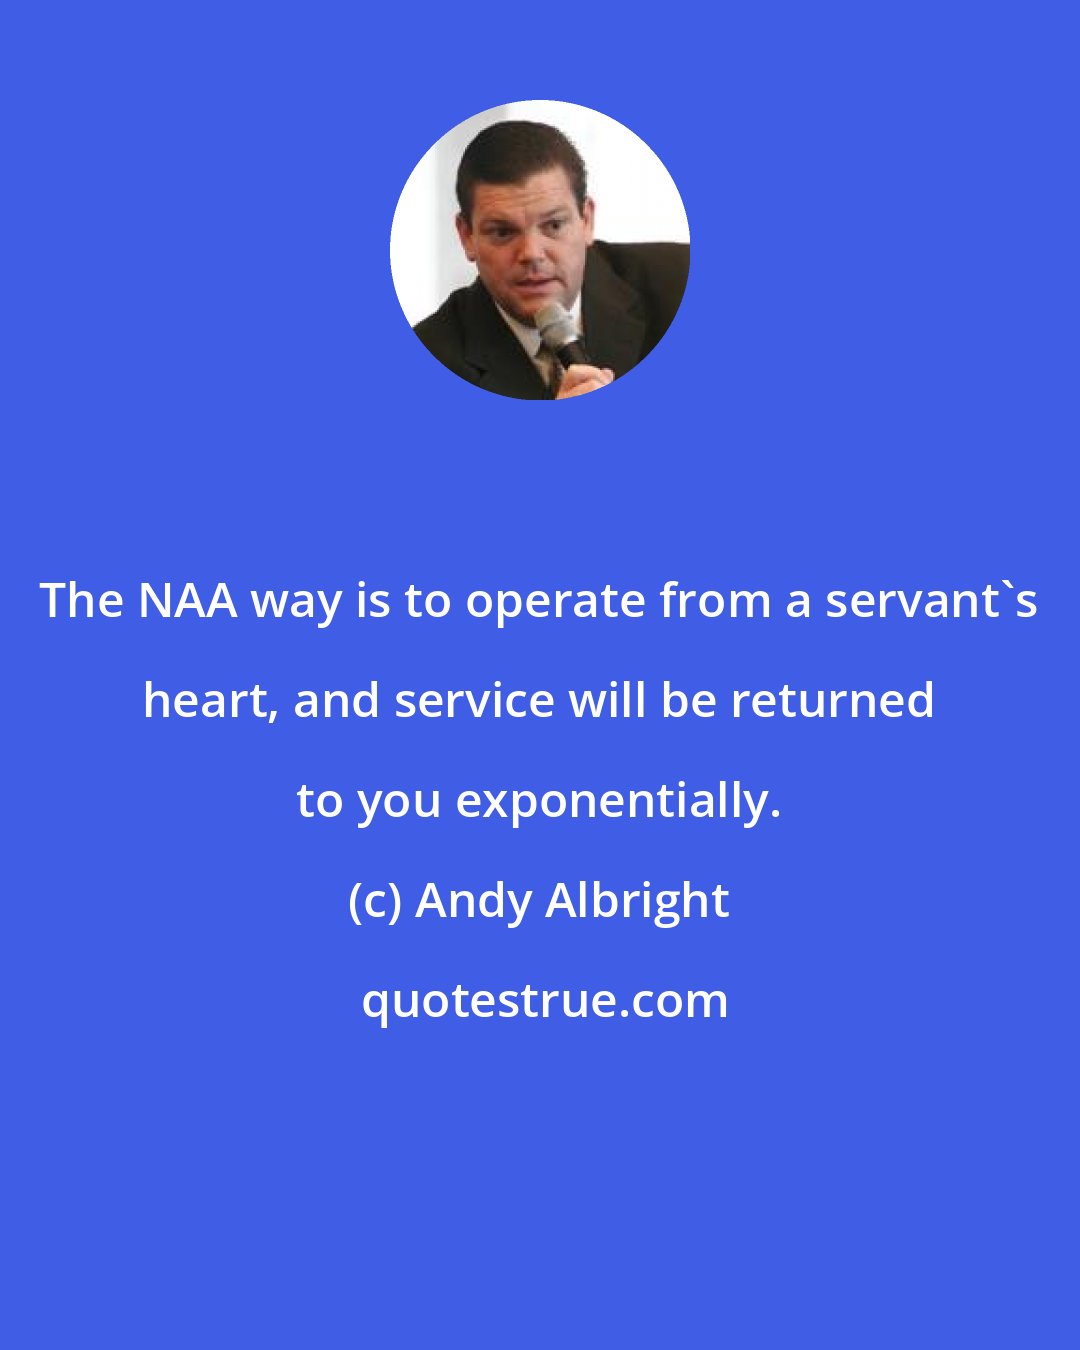 Andy Albright: The NAA way is to operate from a servant's heart, and service will be returned to you exponentially.